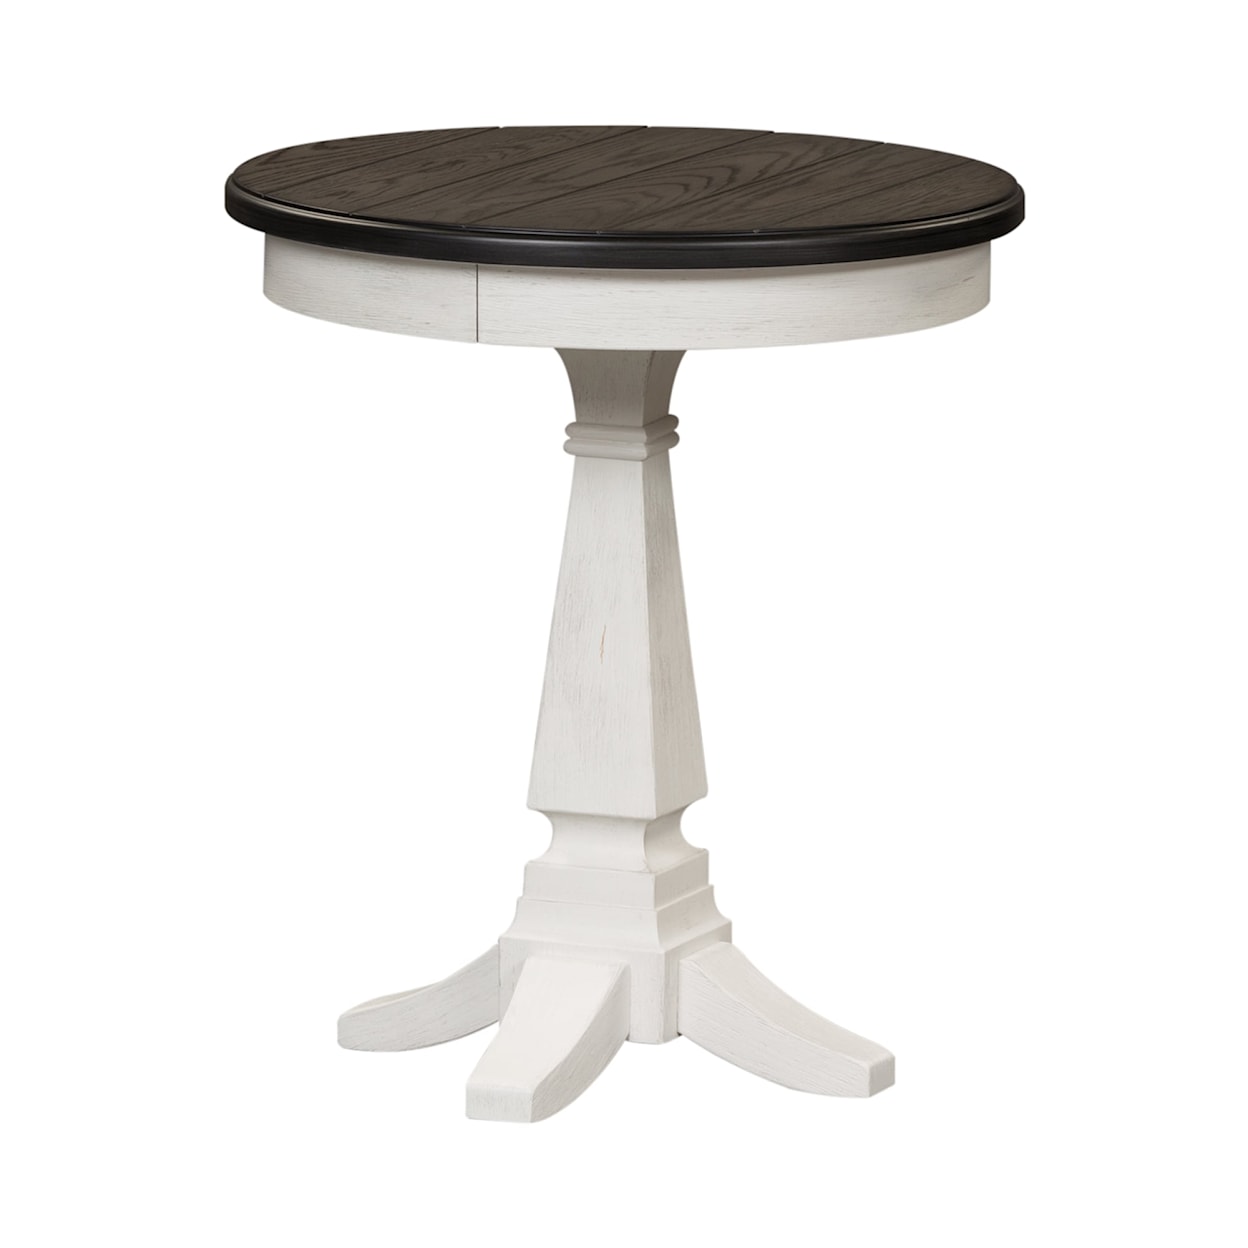 Liberty Furniture Allyson Park Chairside Table